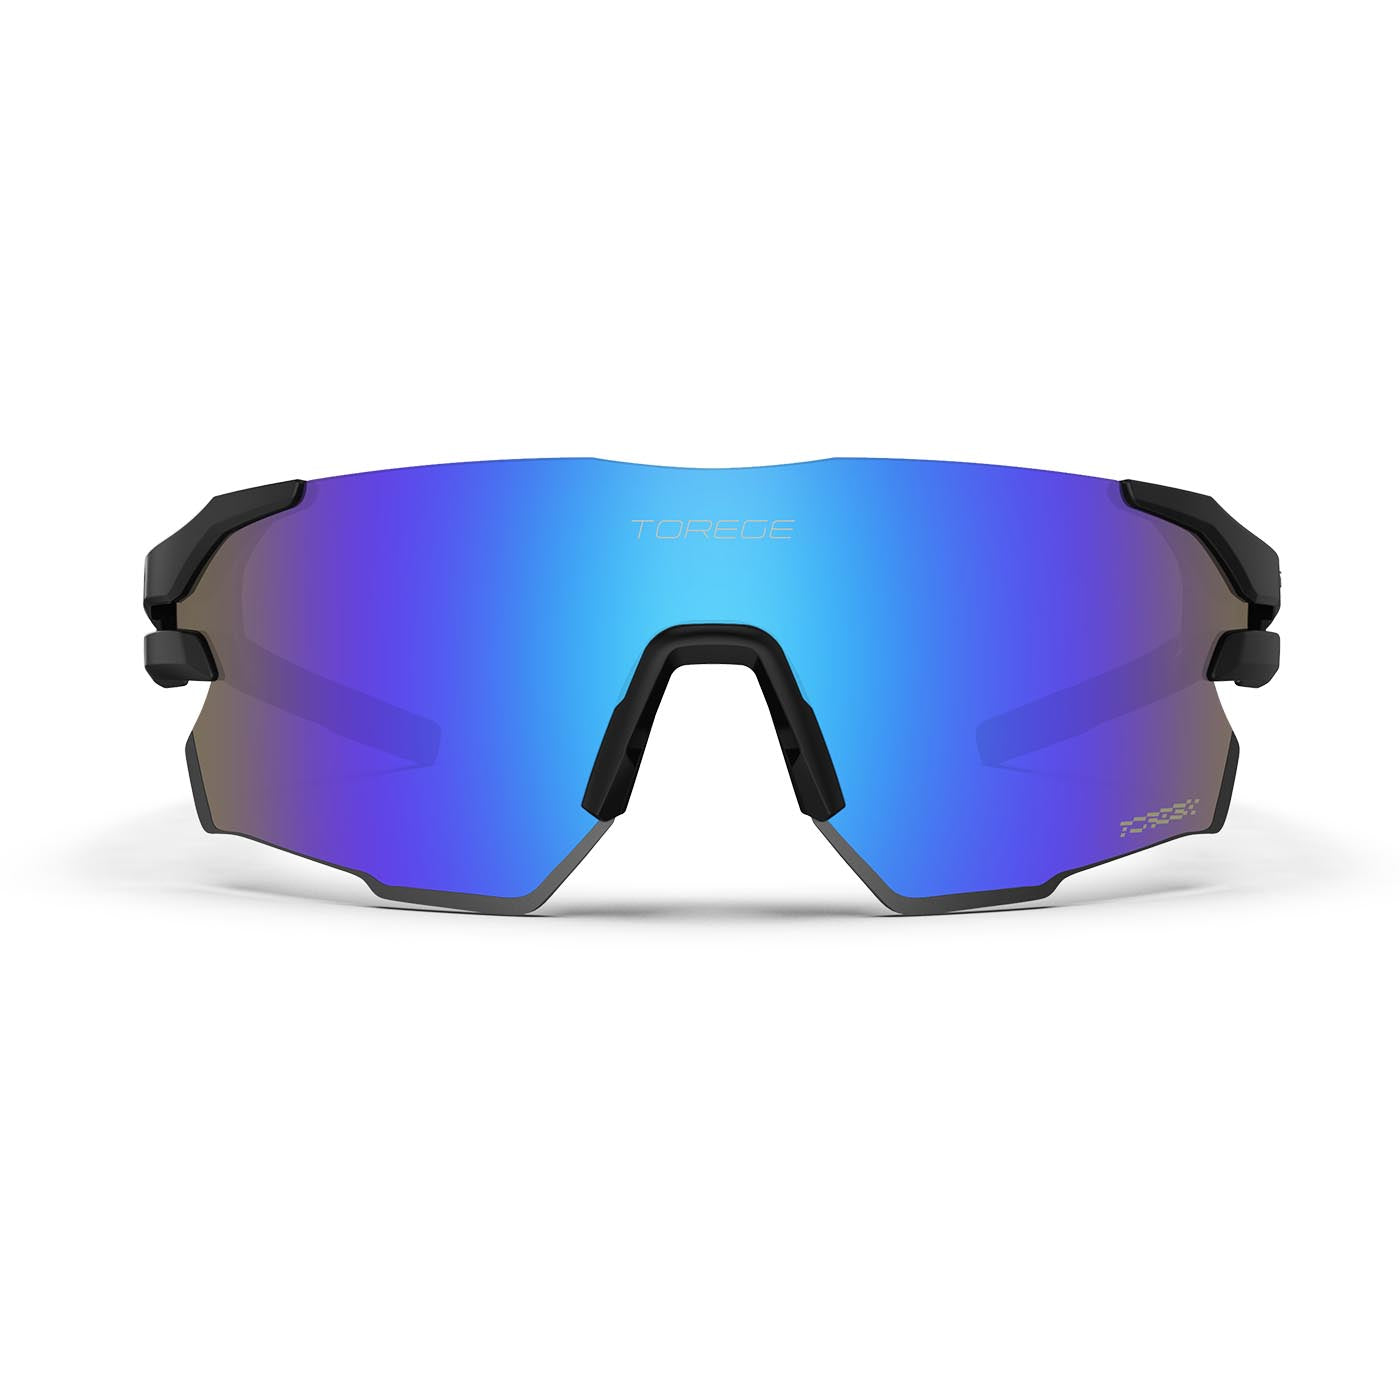 Clarity Ultra Lightweight Sports Sunglasses for Men & Women With Lifetime  Warranty - Ideal for Cycling, Hiking, Fishing, Golf & Running - Black  Wraparound Frame & Toriex Blue Lens Mirror